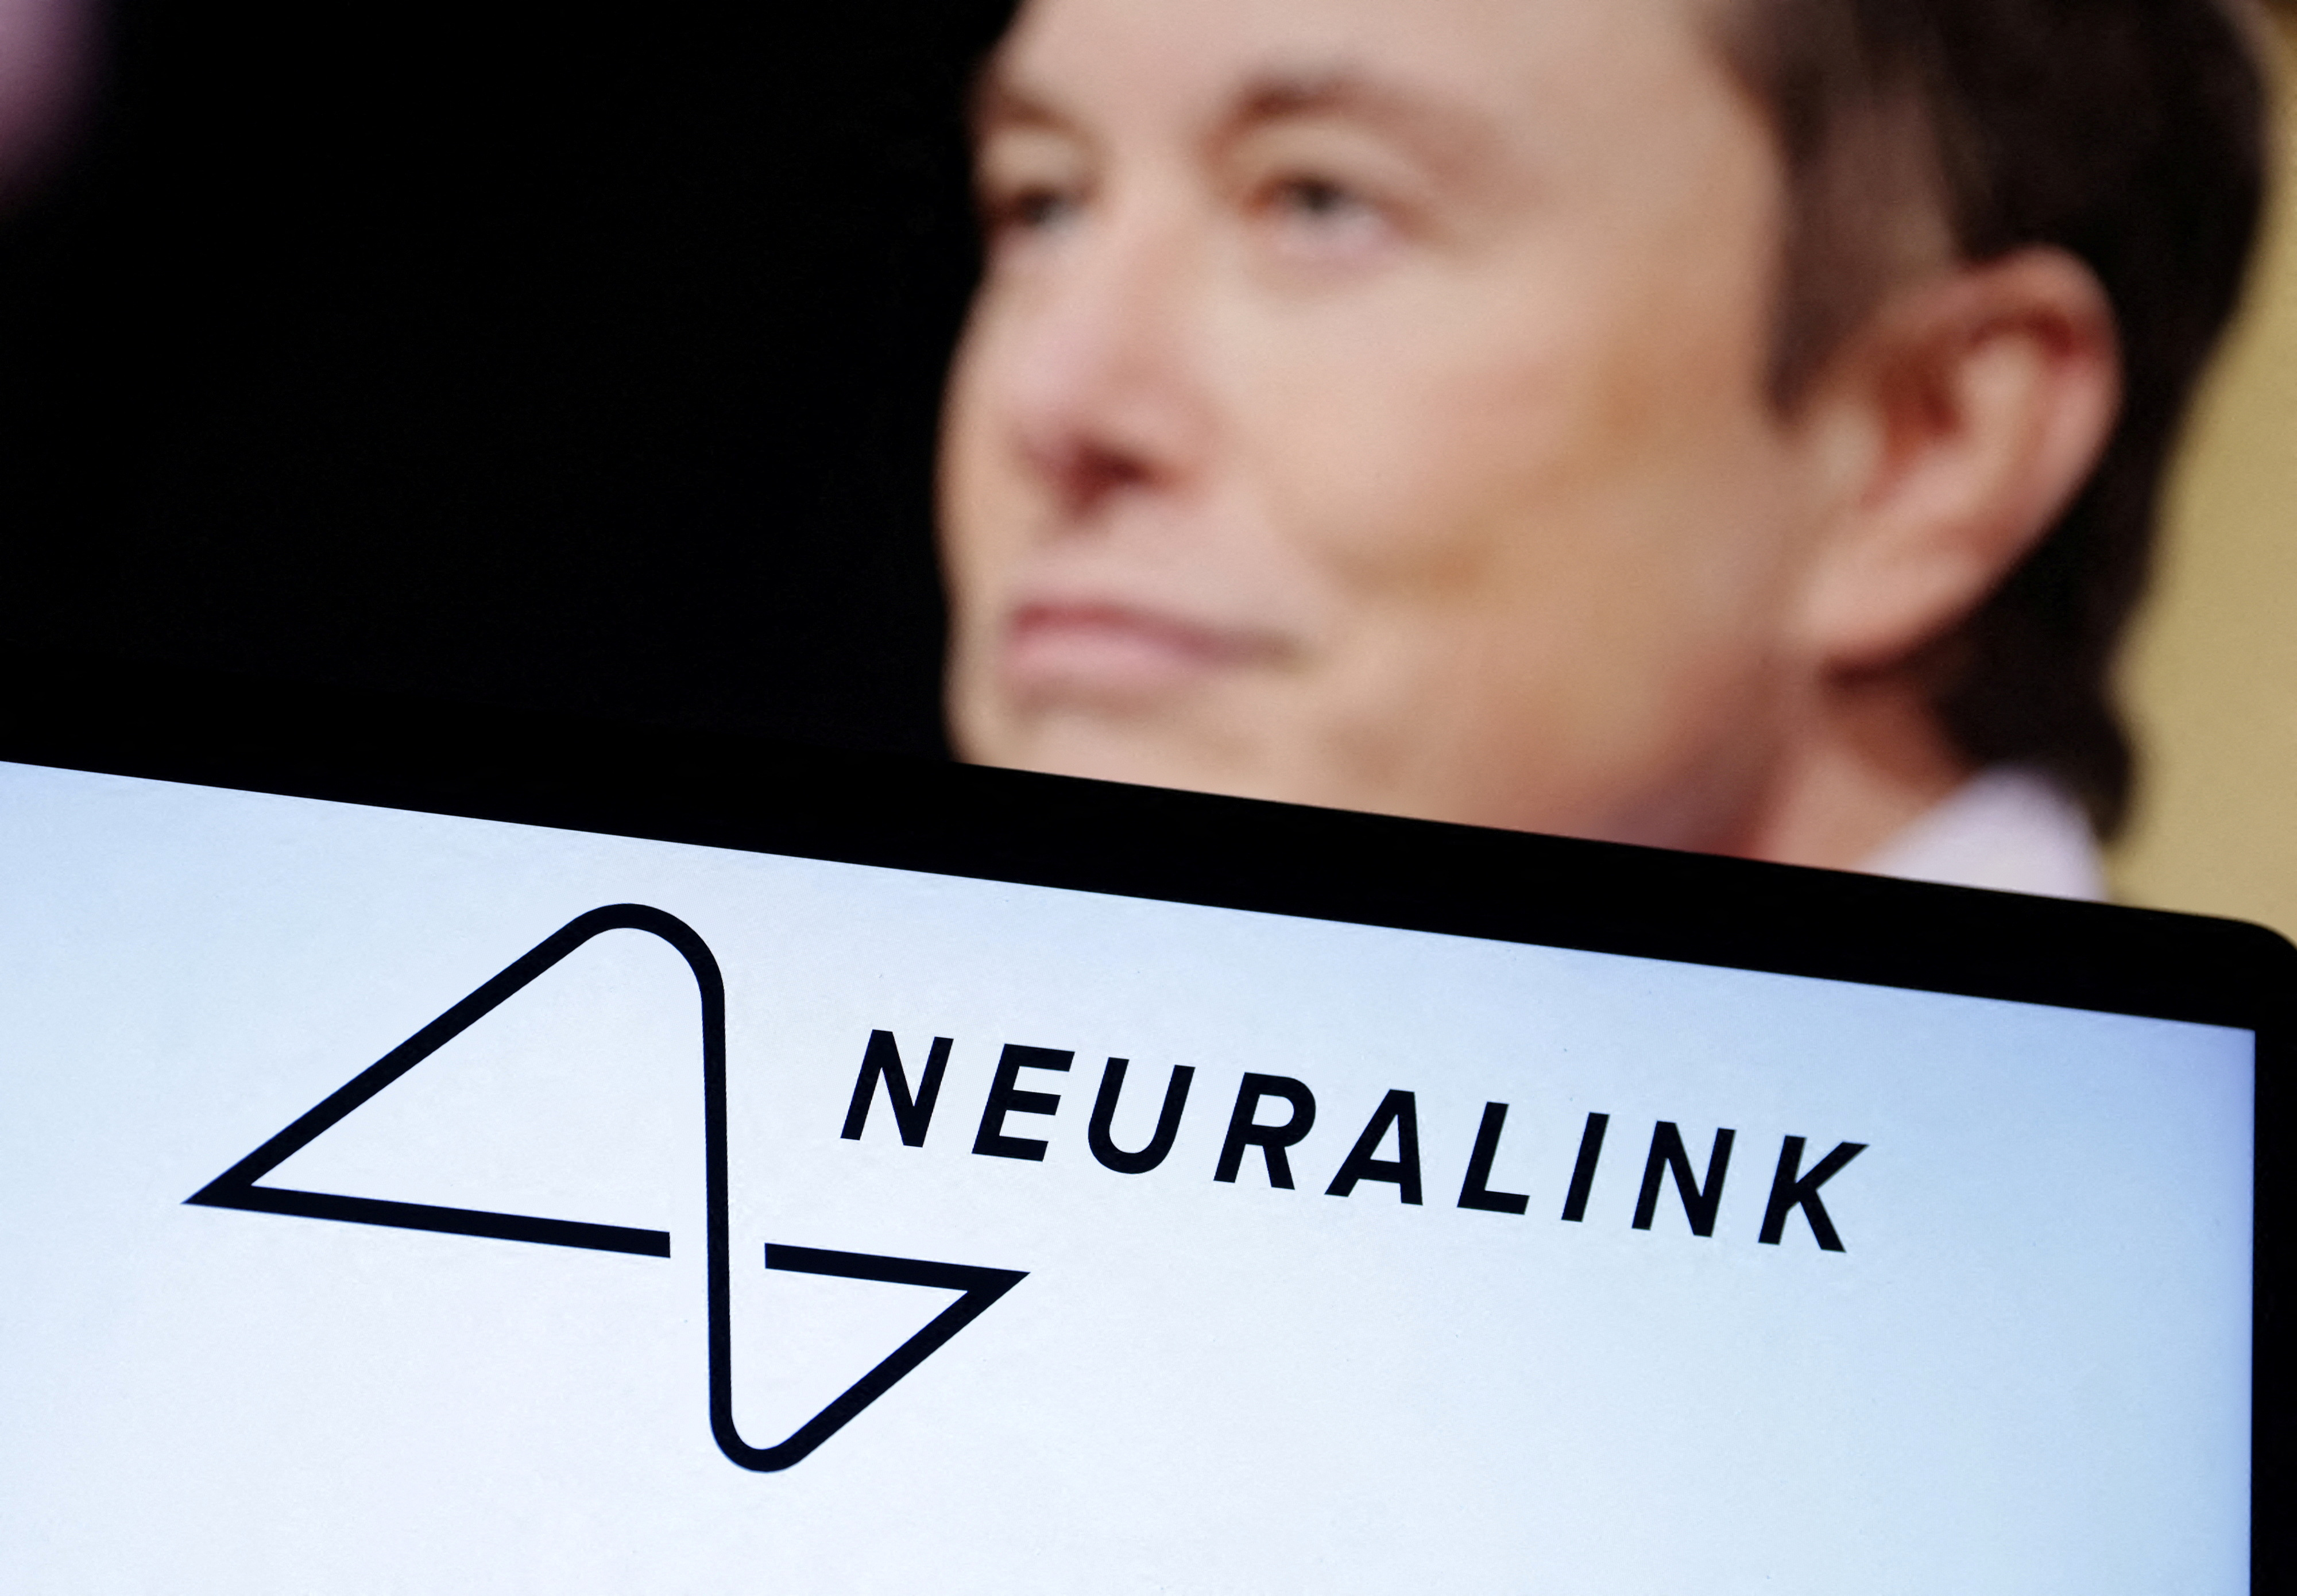 Elon Musk Receives Approval for Brain Implants, Sparking Widespread Humor